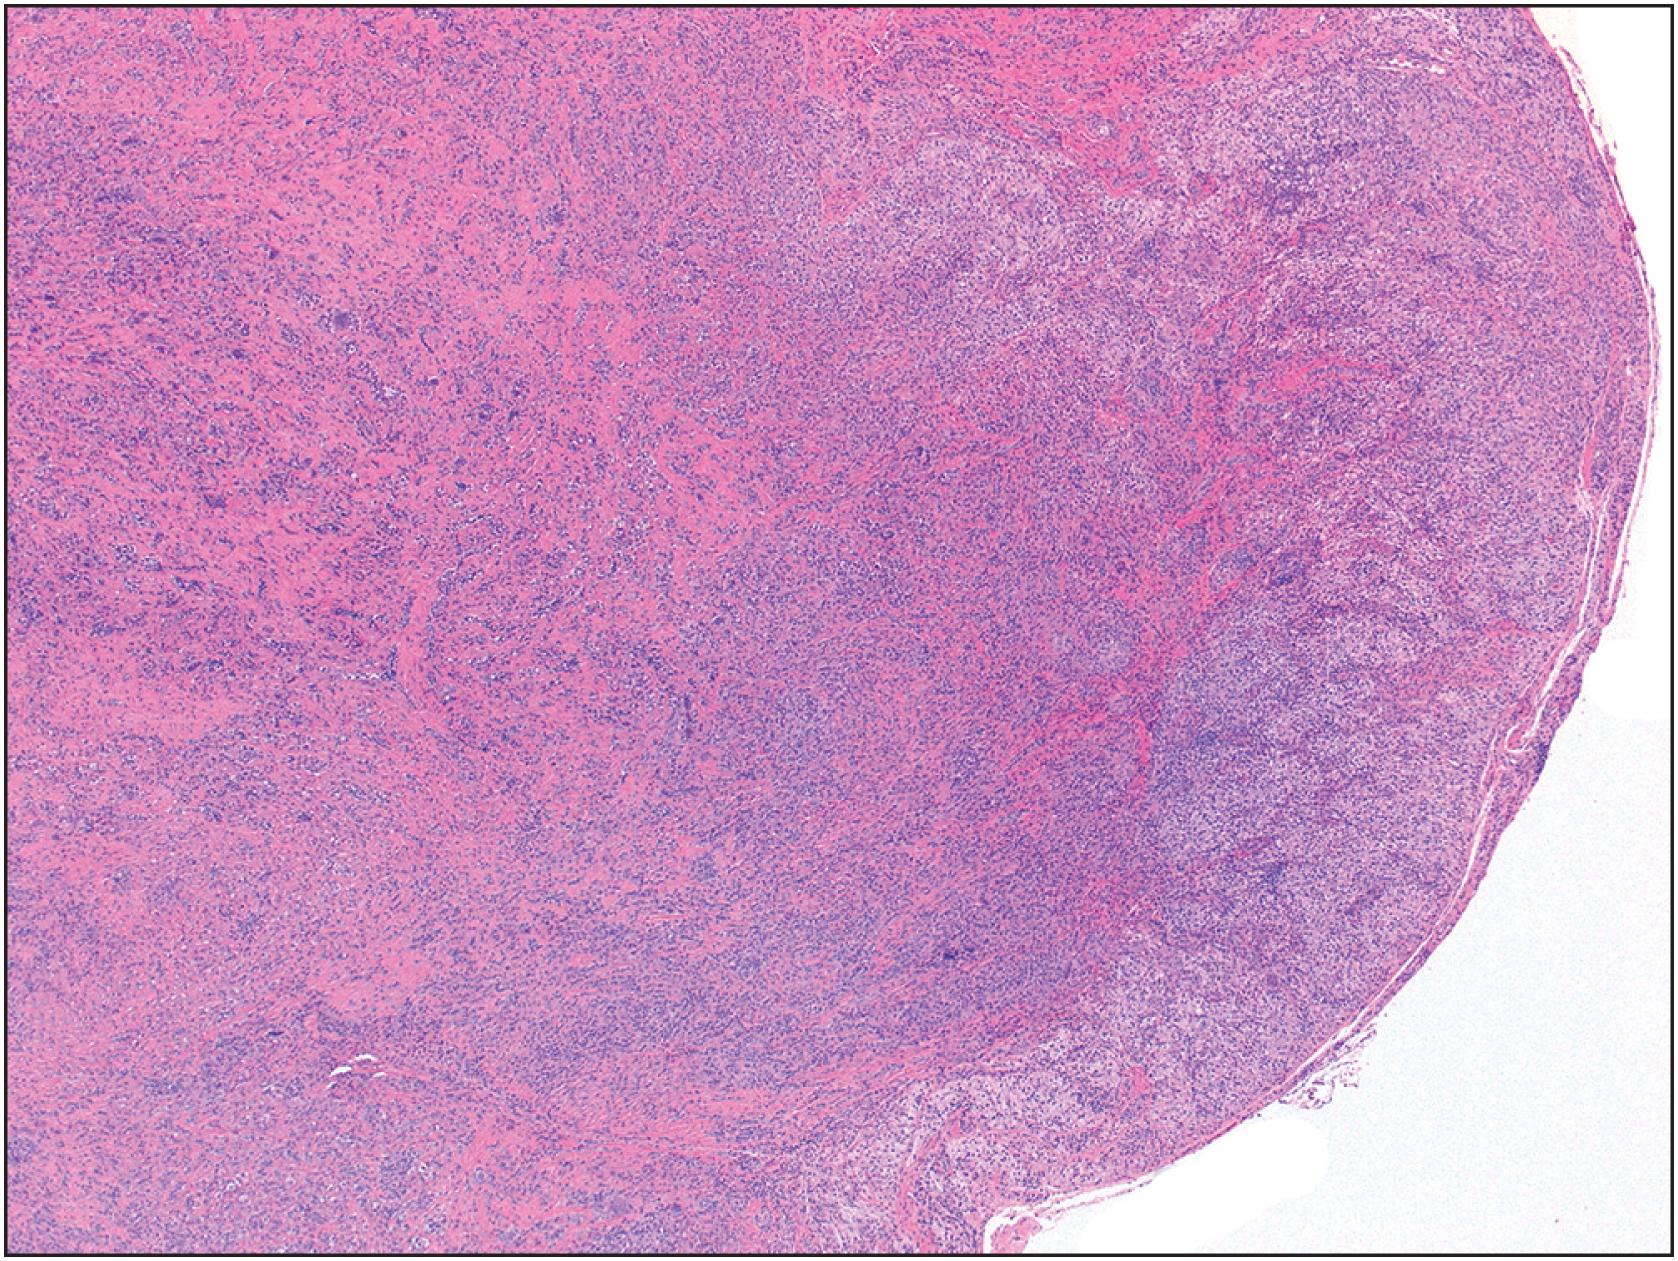 Fig. 13.13, Localized tenosynovial giant cell tumor is a lobulated mass composed of an admixture of osteoclast-type giant cells and mononuclear cells in a variably prominent collagenous stroma.